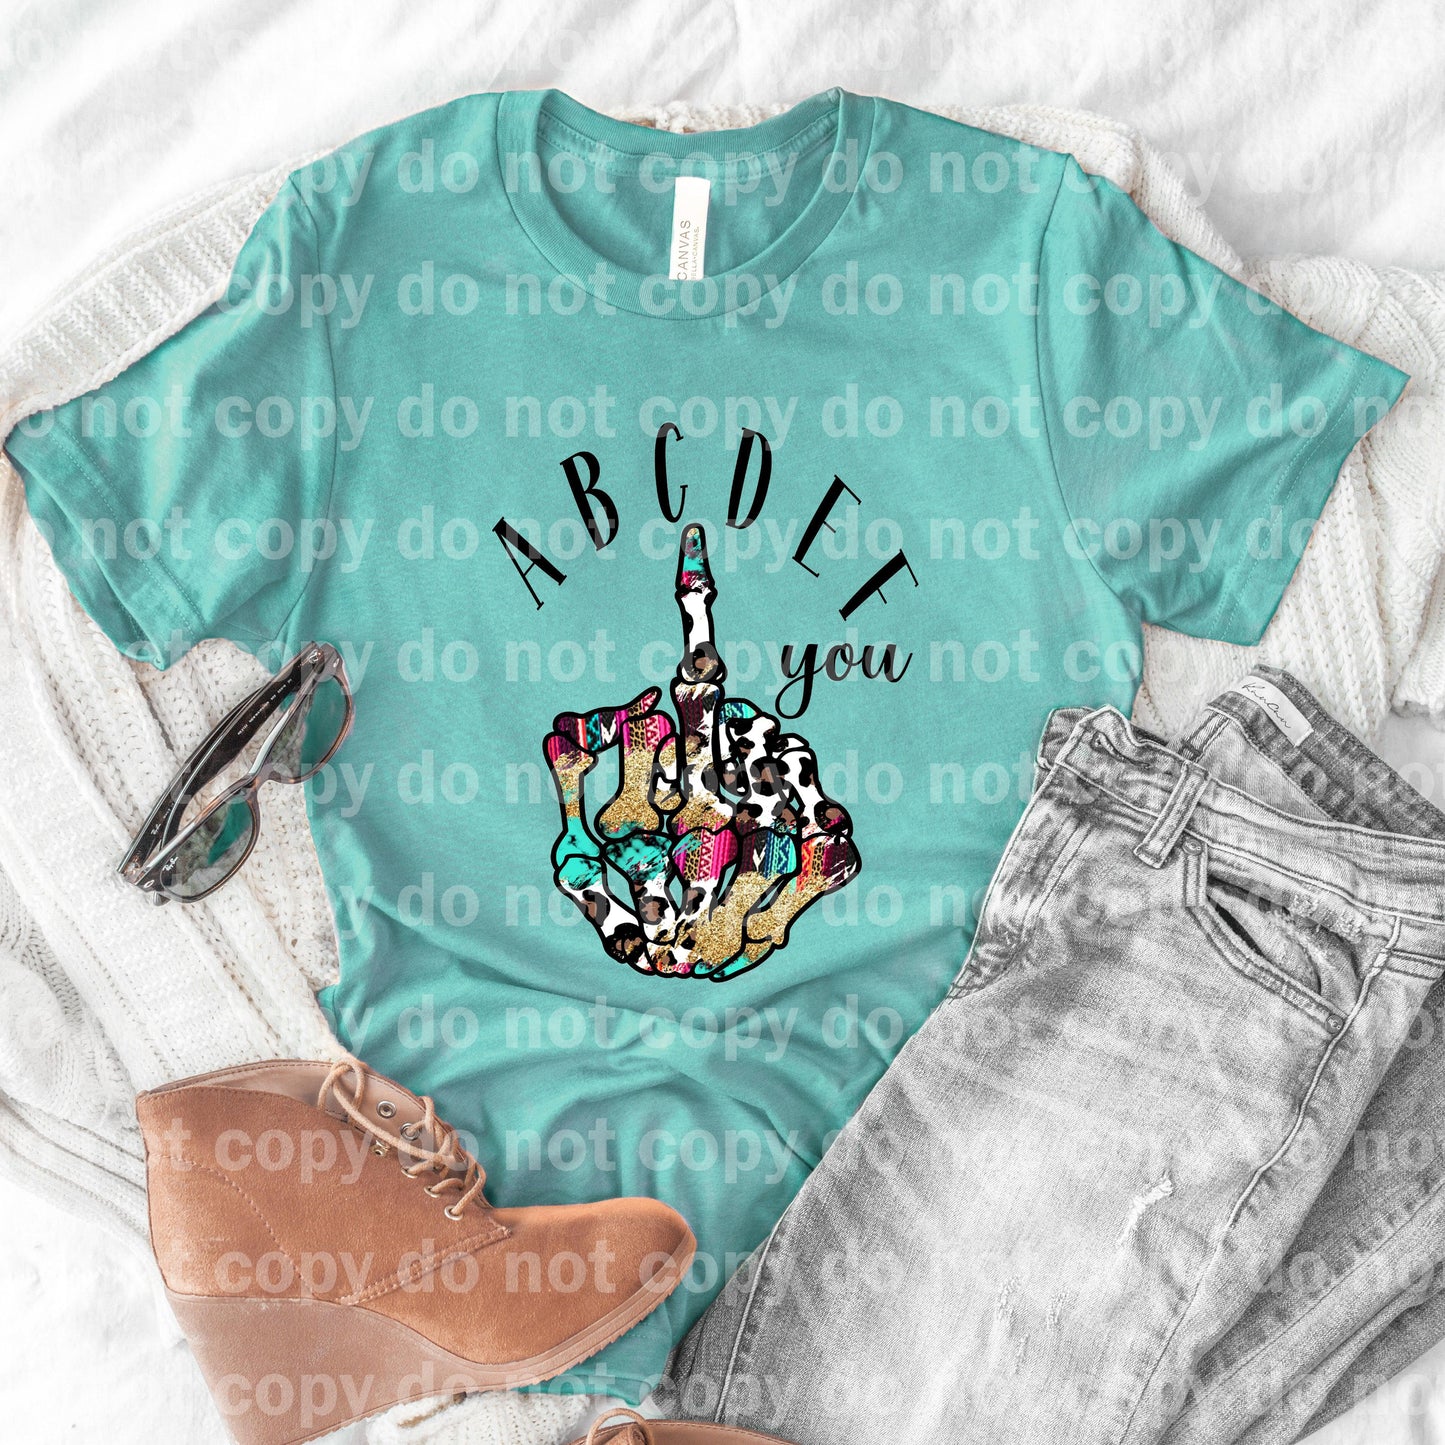 ABCDEF You Western Dream Print or Sublimation Print